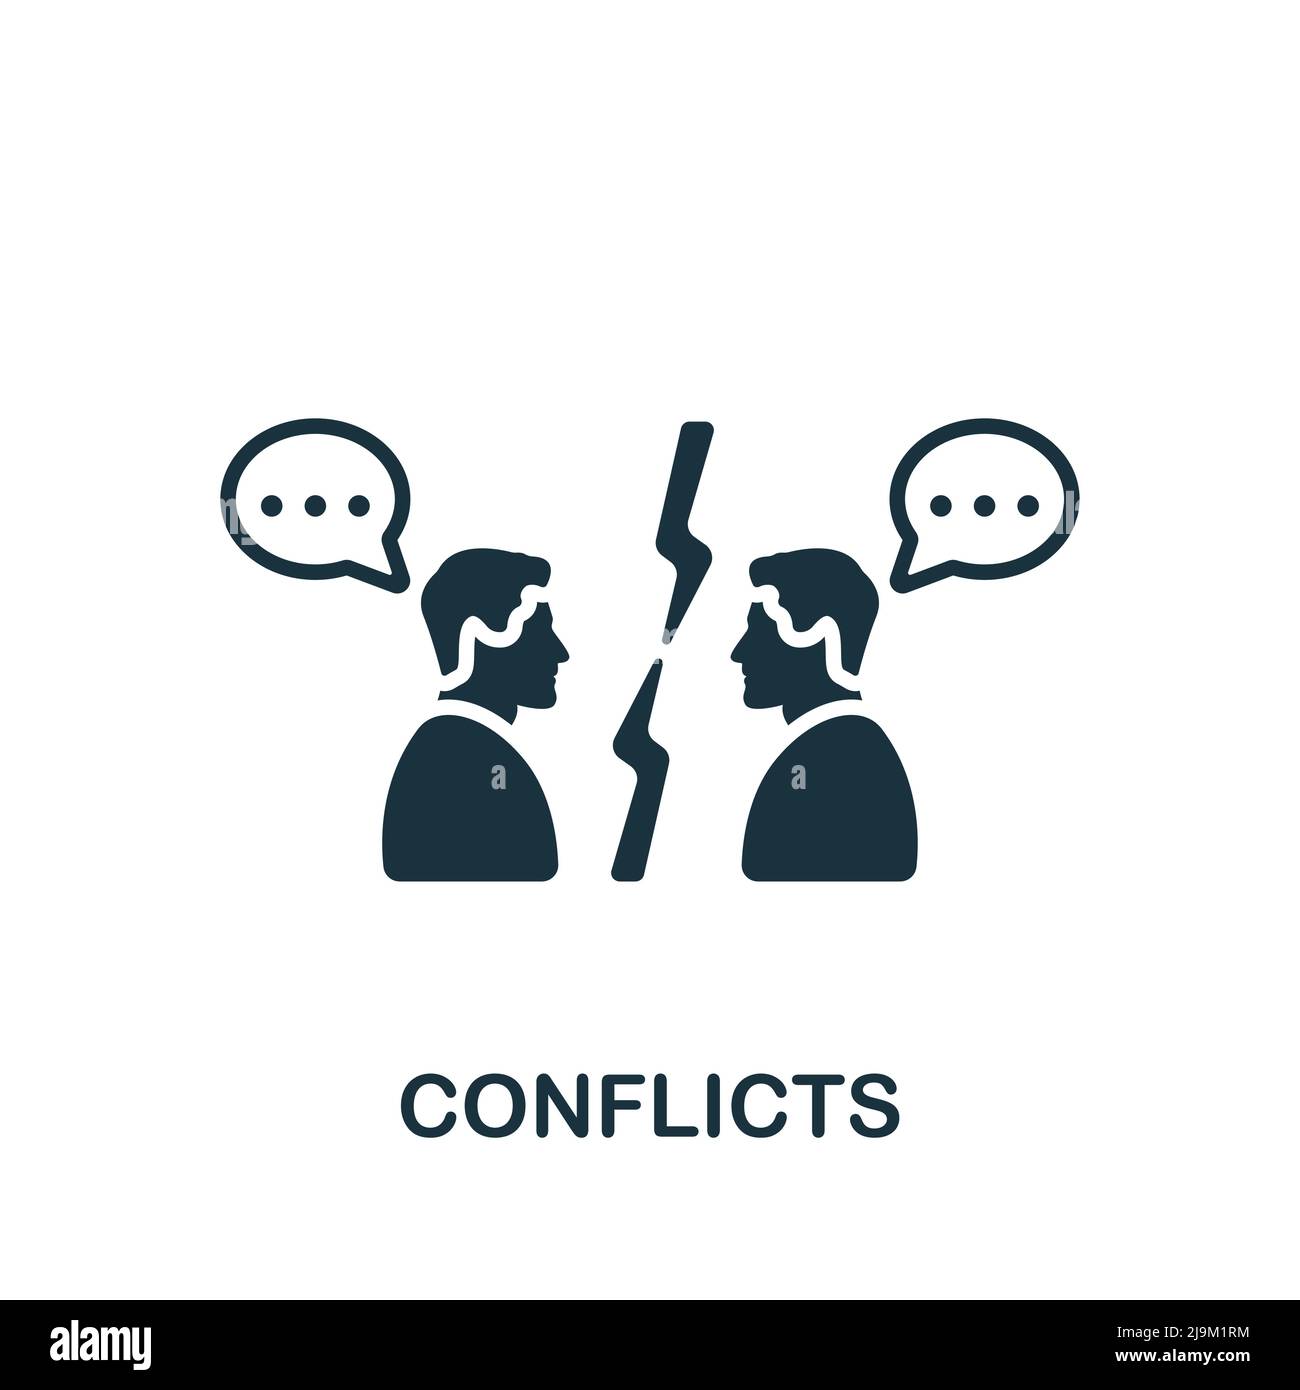 Conflicts icon. Monochrome simple Psychology icon for templates, web design and infographics Stock Vector